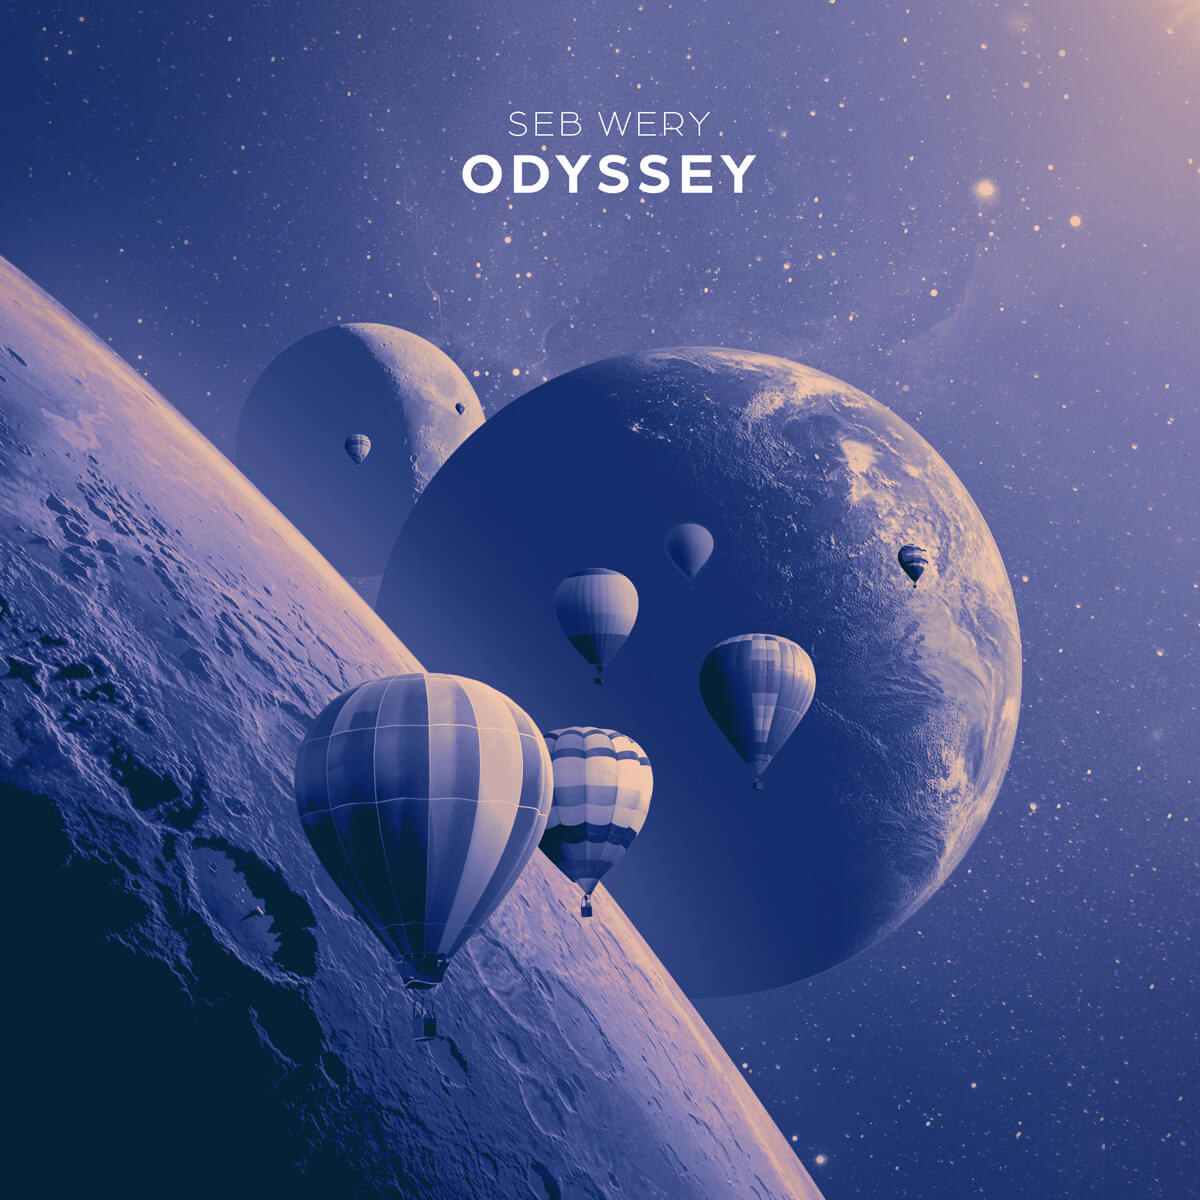 Seb Wery - Odyssey Available